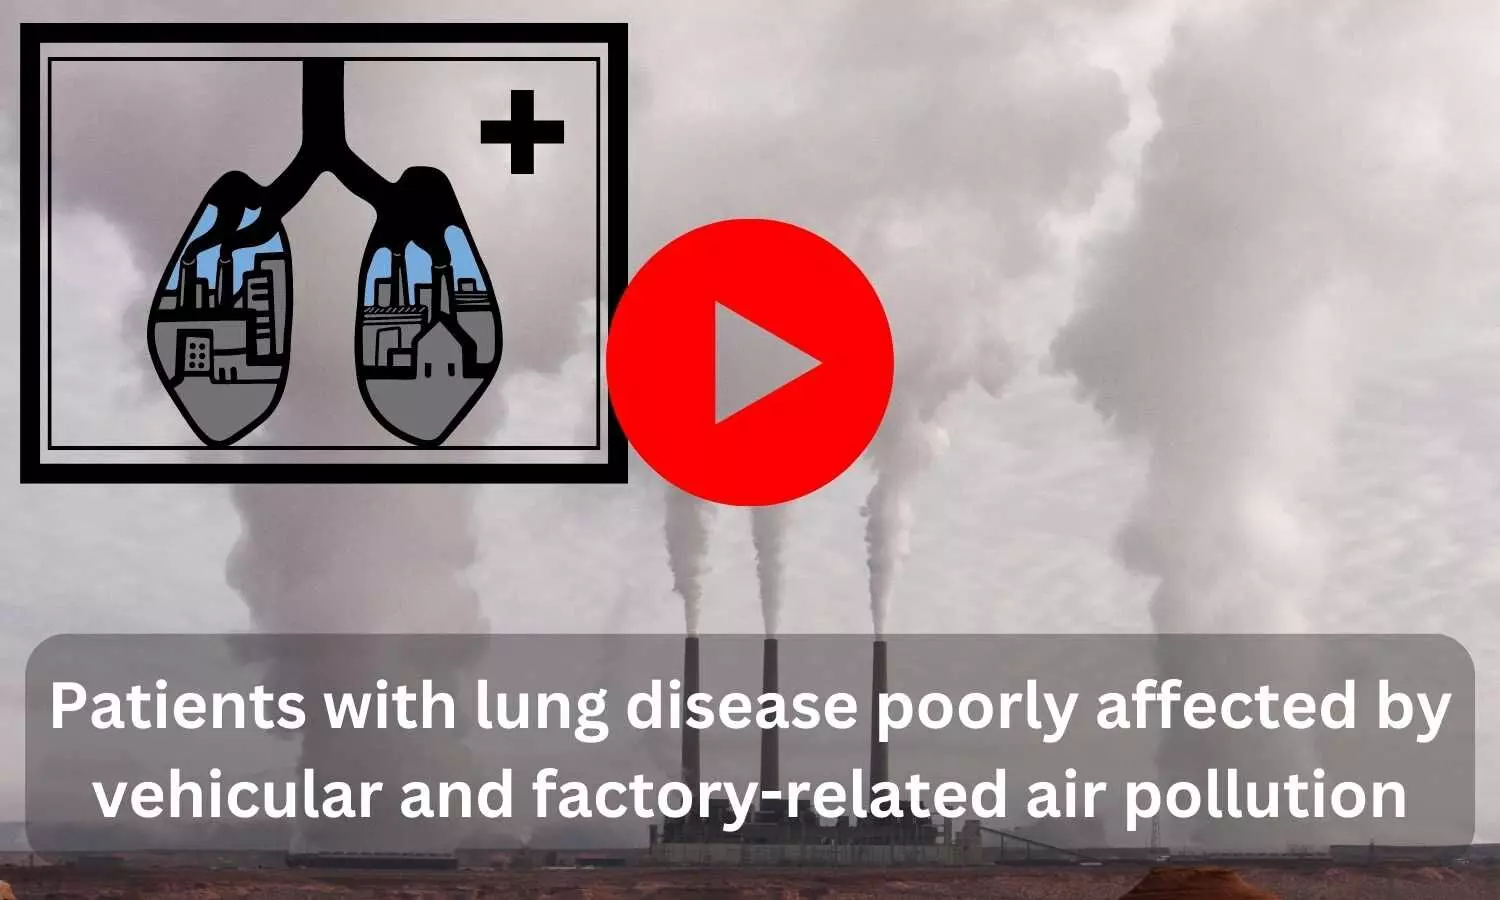 Patients with lung disease poorly affected by vehicular and factory-related air pollution